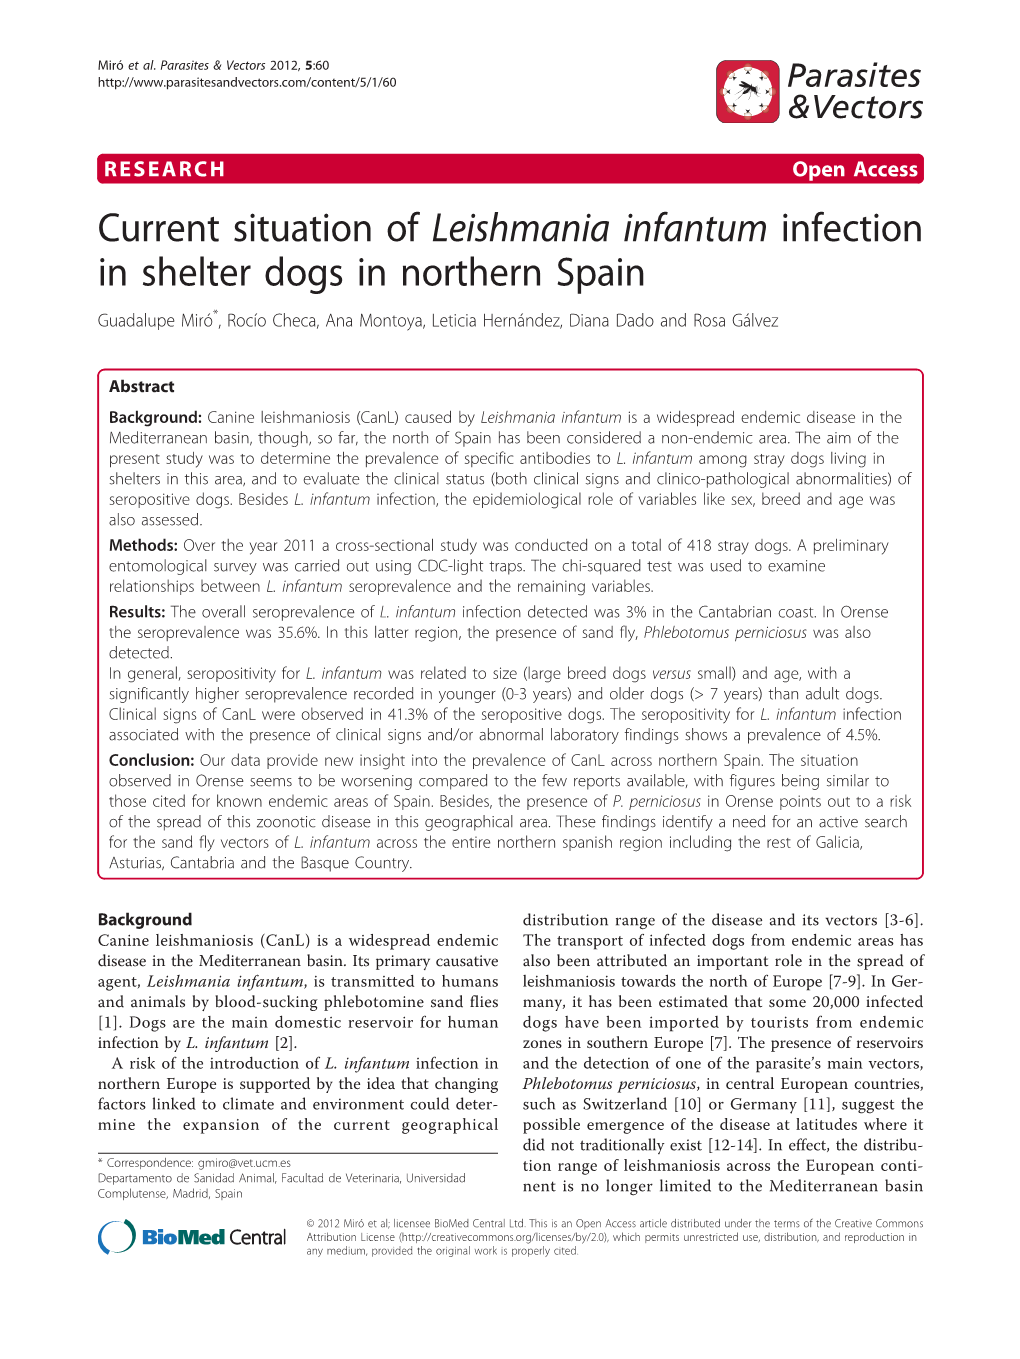 Current Situation of Leishmania Infantum Infection in Shelter Dogs In